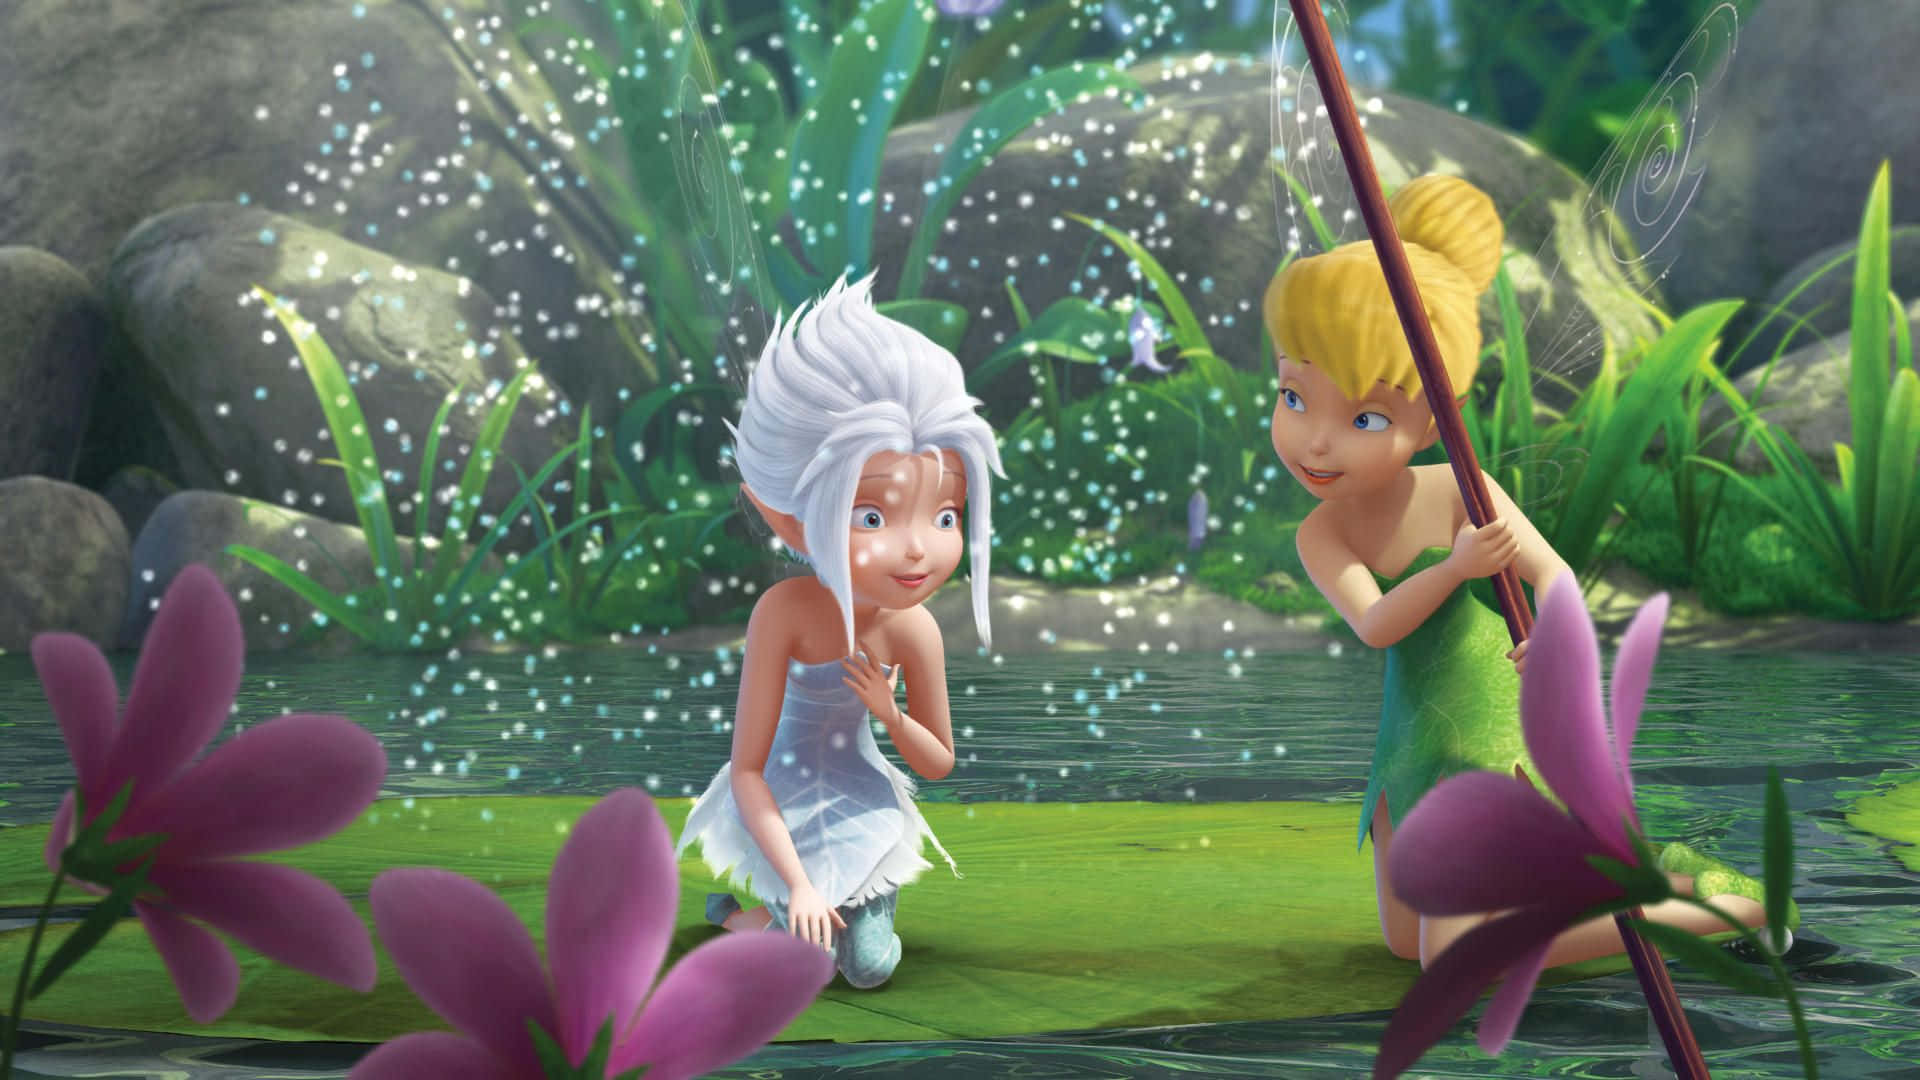 Tinkerbell Sparkling in a Magical Forest